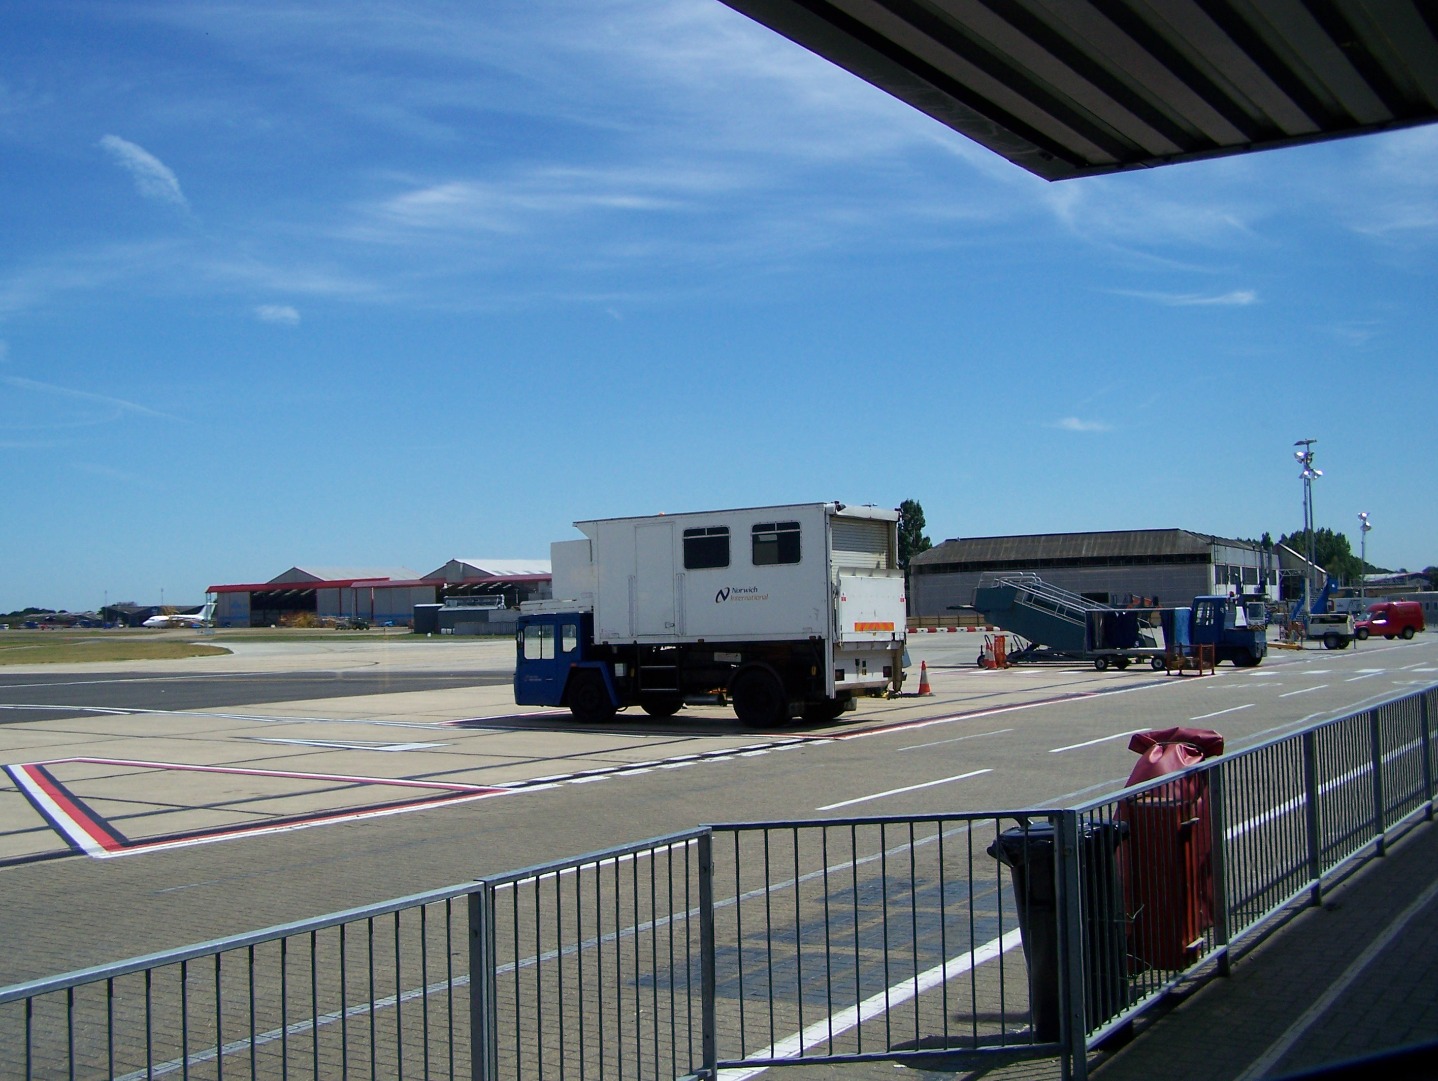 002Airport apron, with Type C1 hangar in distance on right side 16:07:2006.JPG